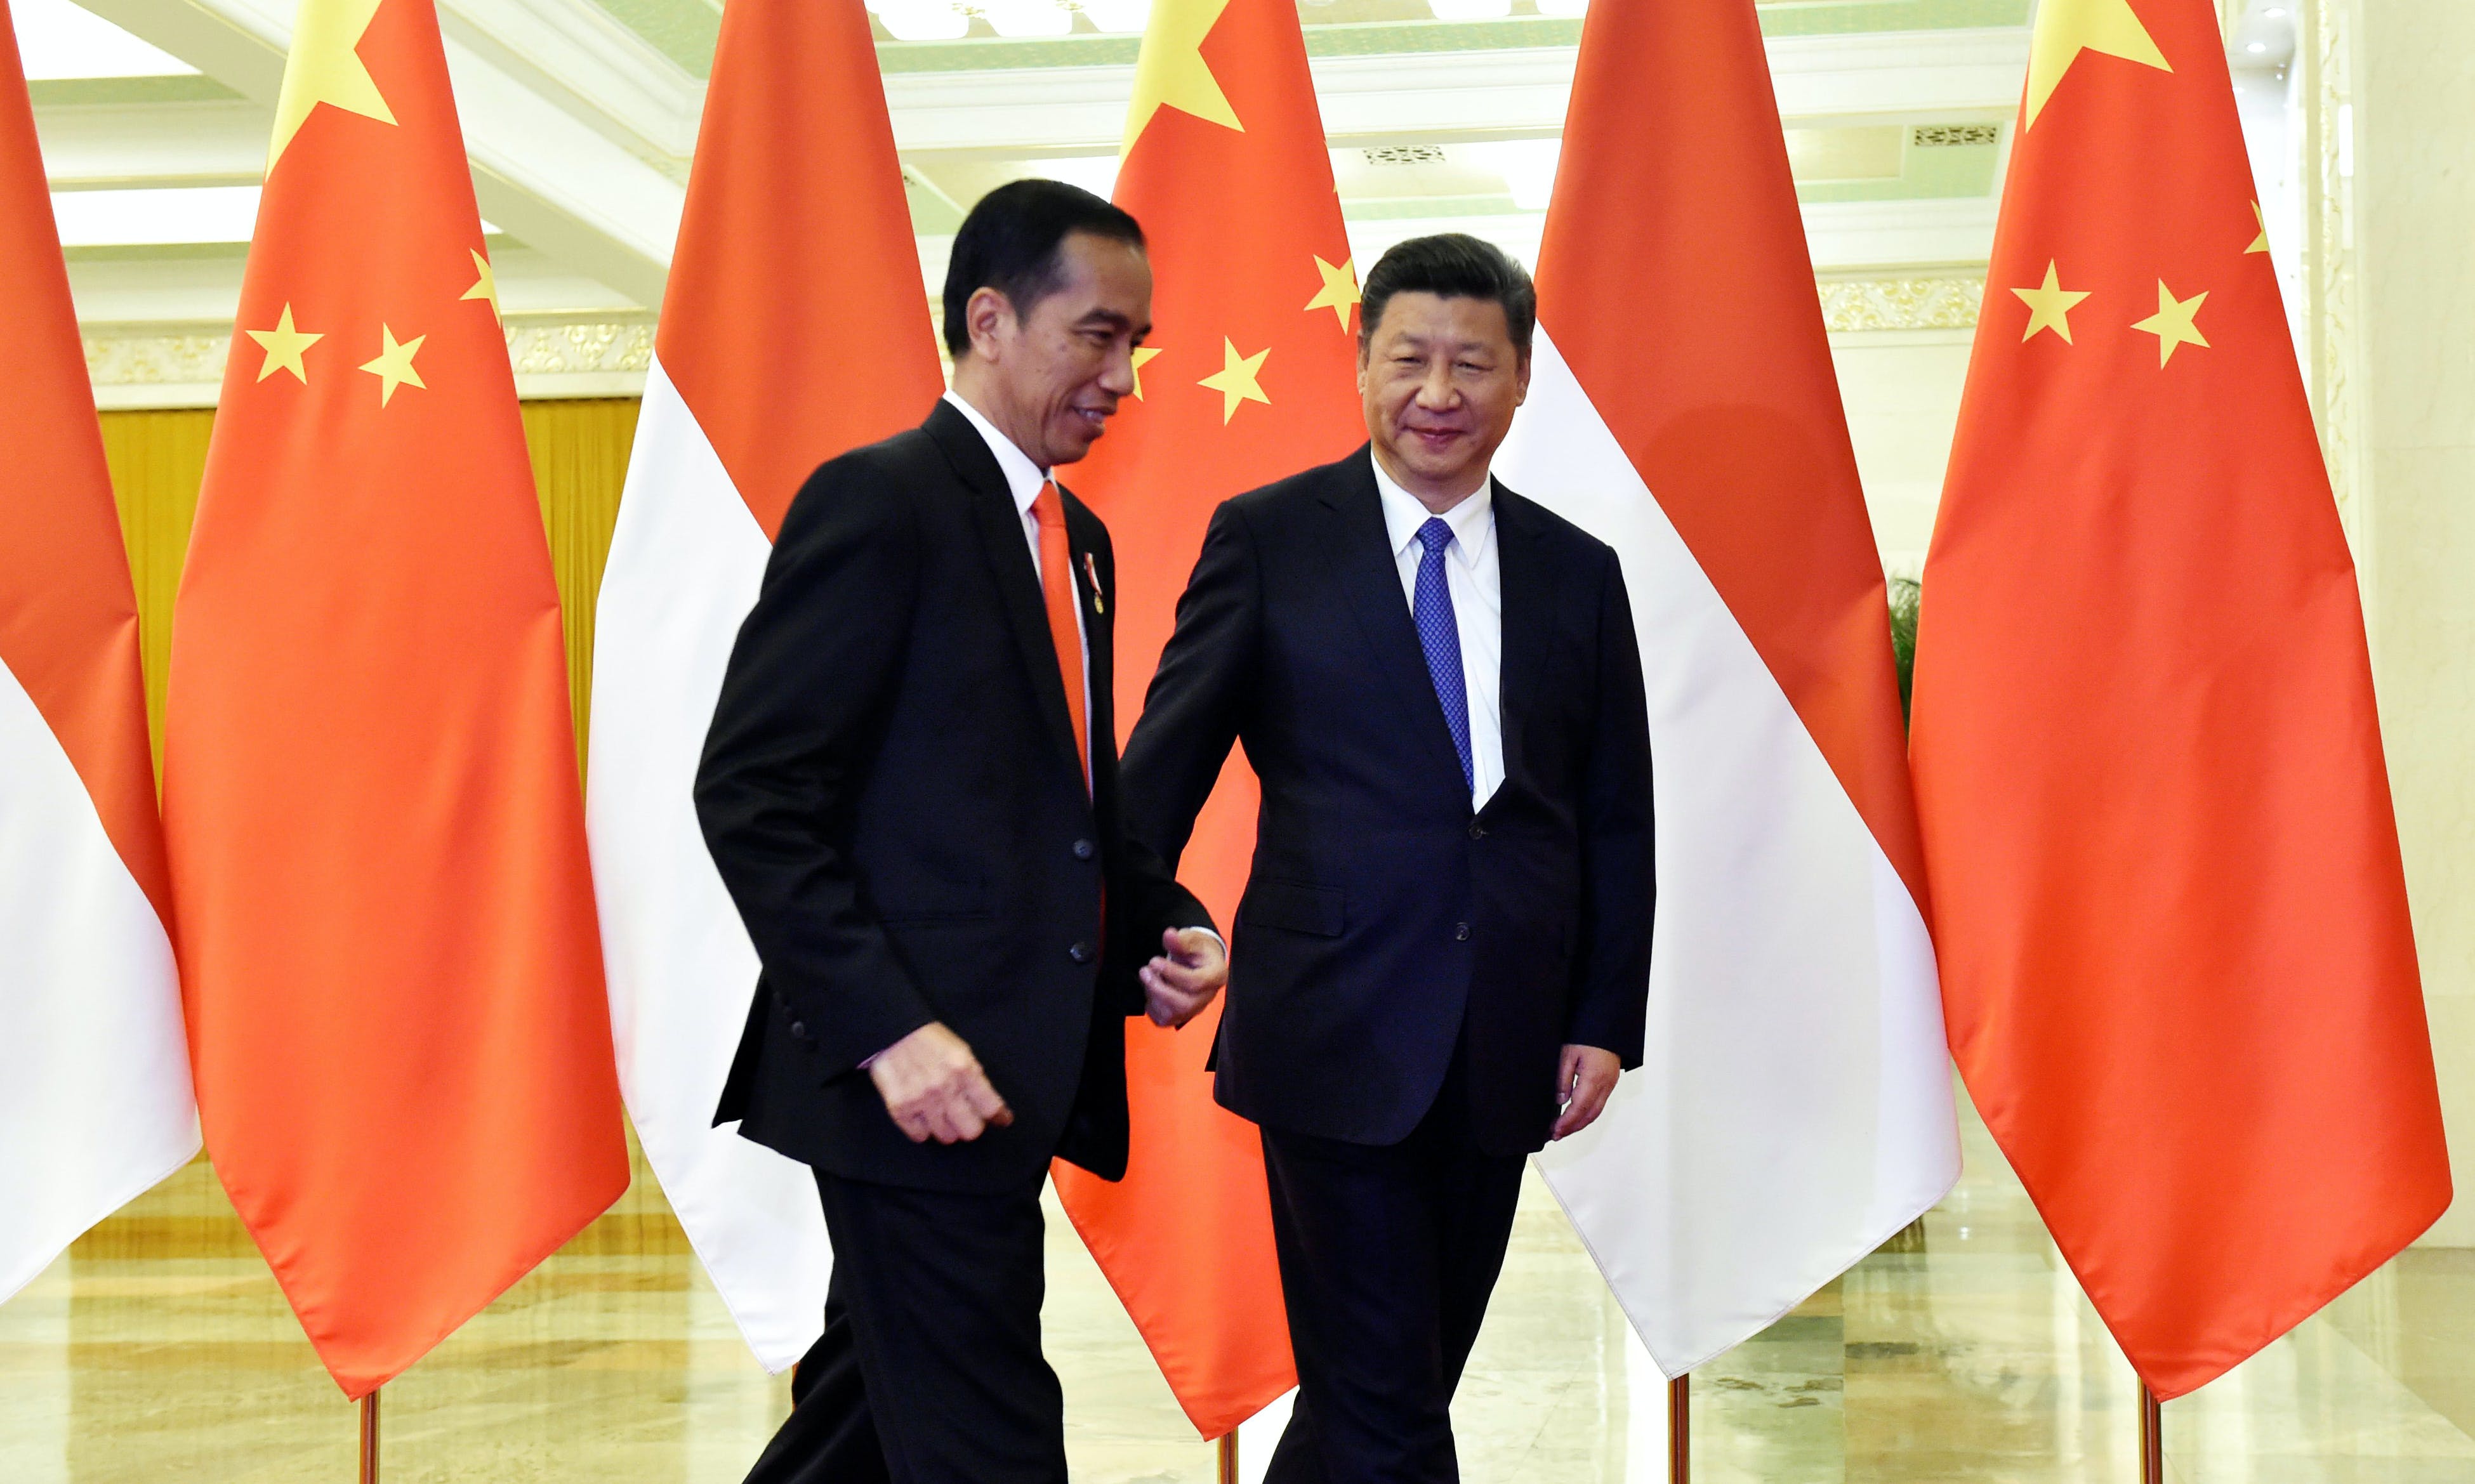 Xinjiang Remains an Enigma in Indonesia's Relationship With China